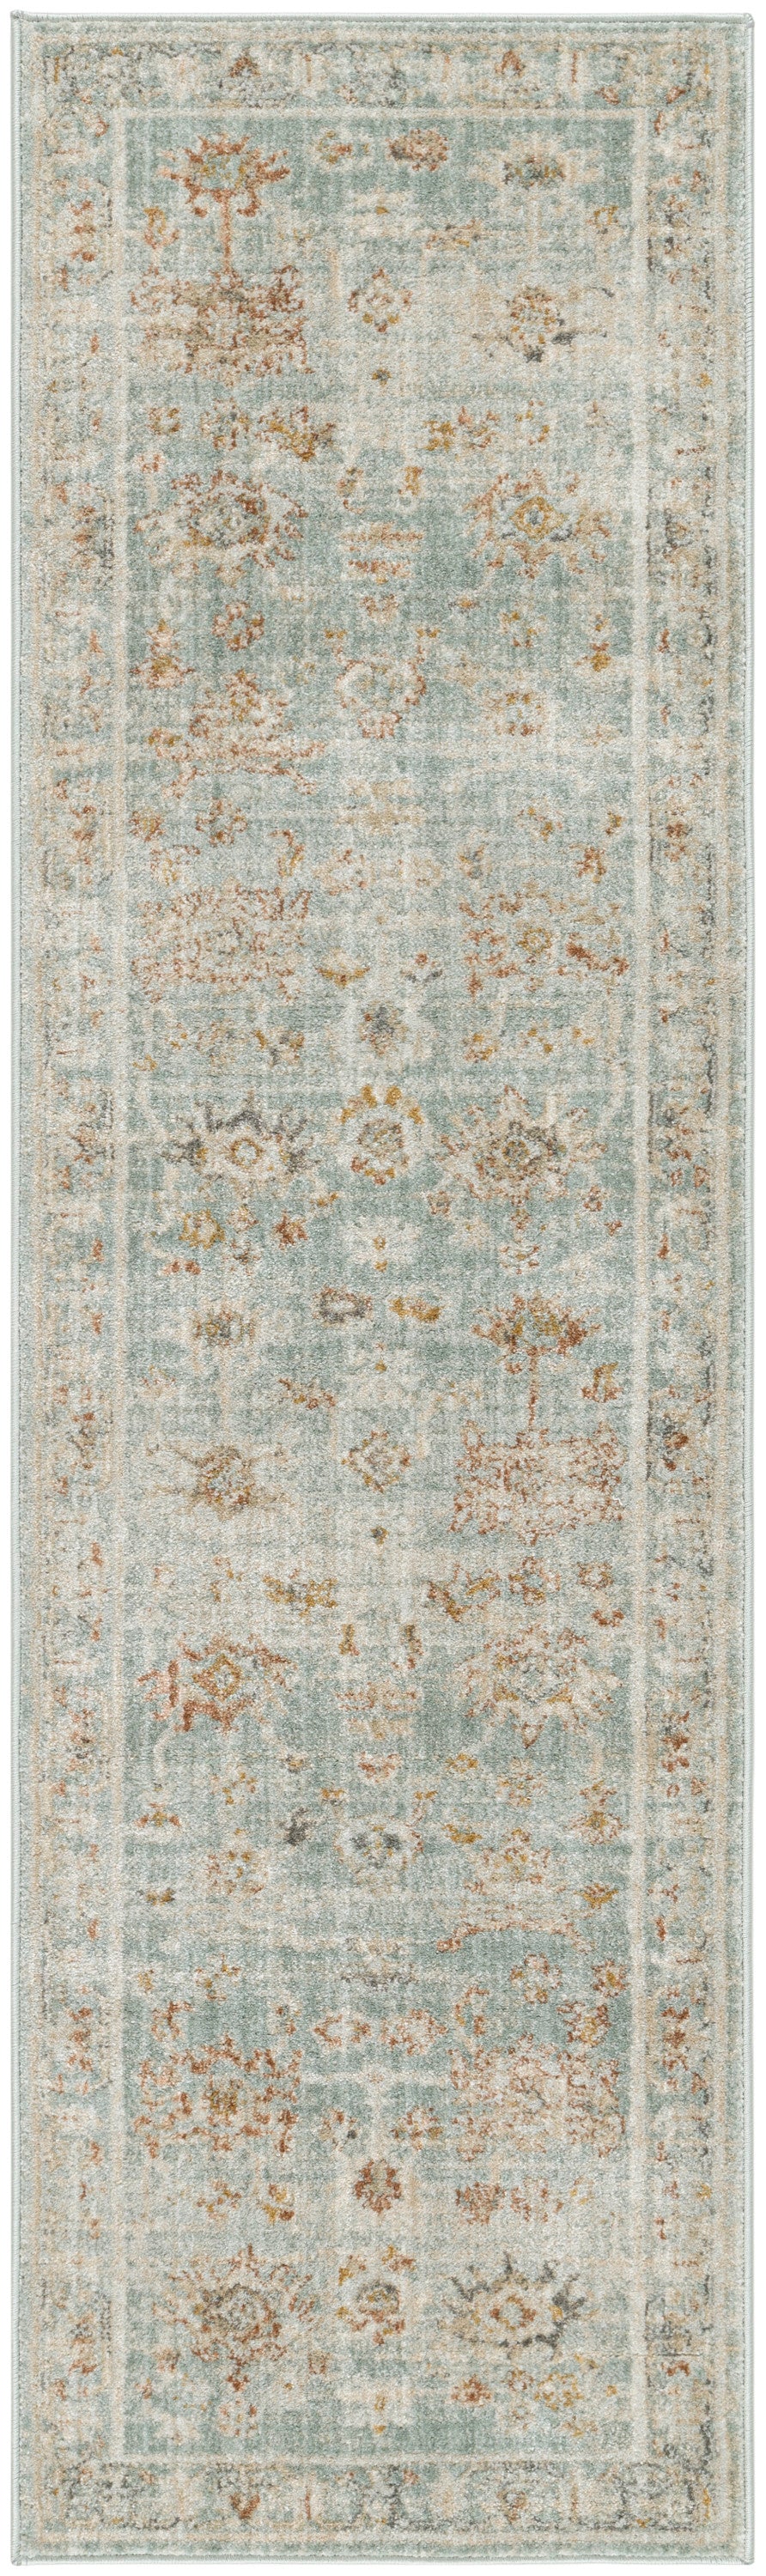 Nourison Home Oases OAE02 Light Blue Traditional Machinemade Rug